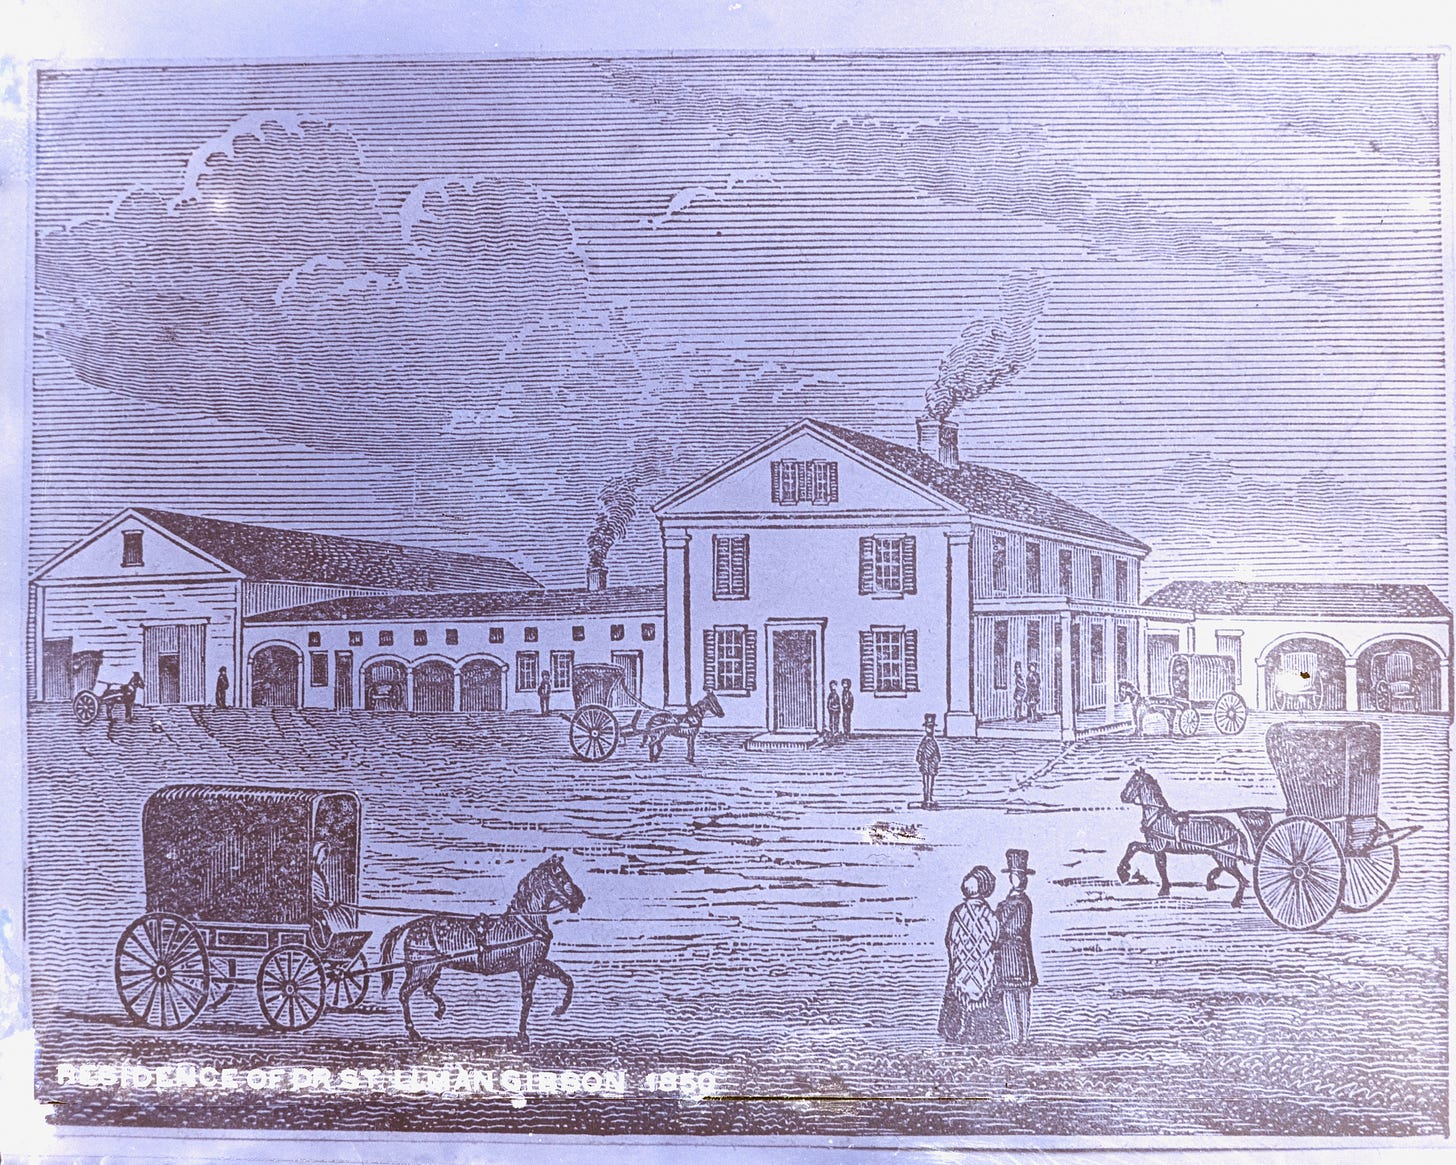 Etching of Dr. Stillman Gibson residence